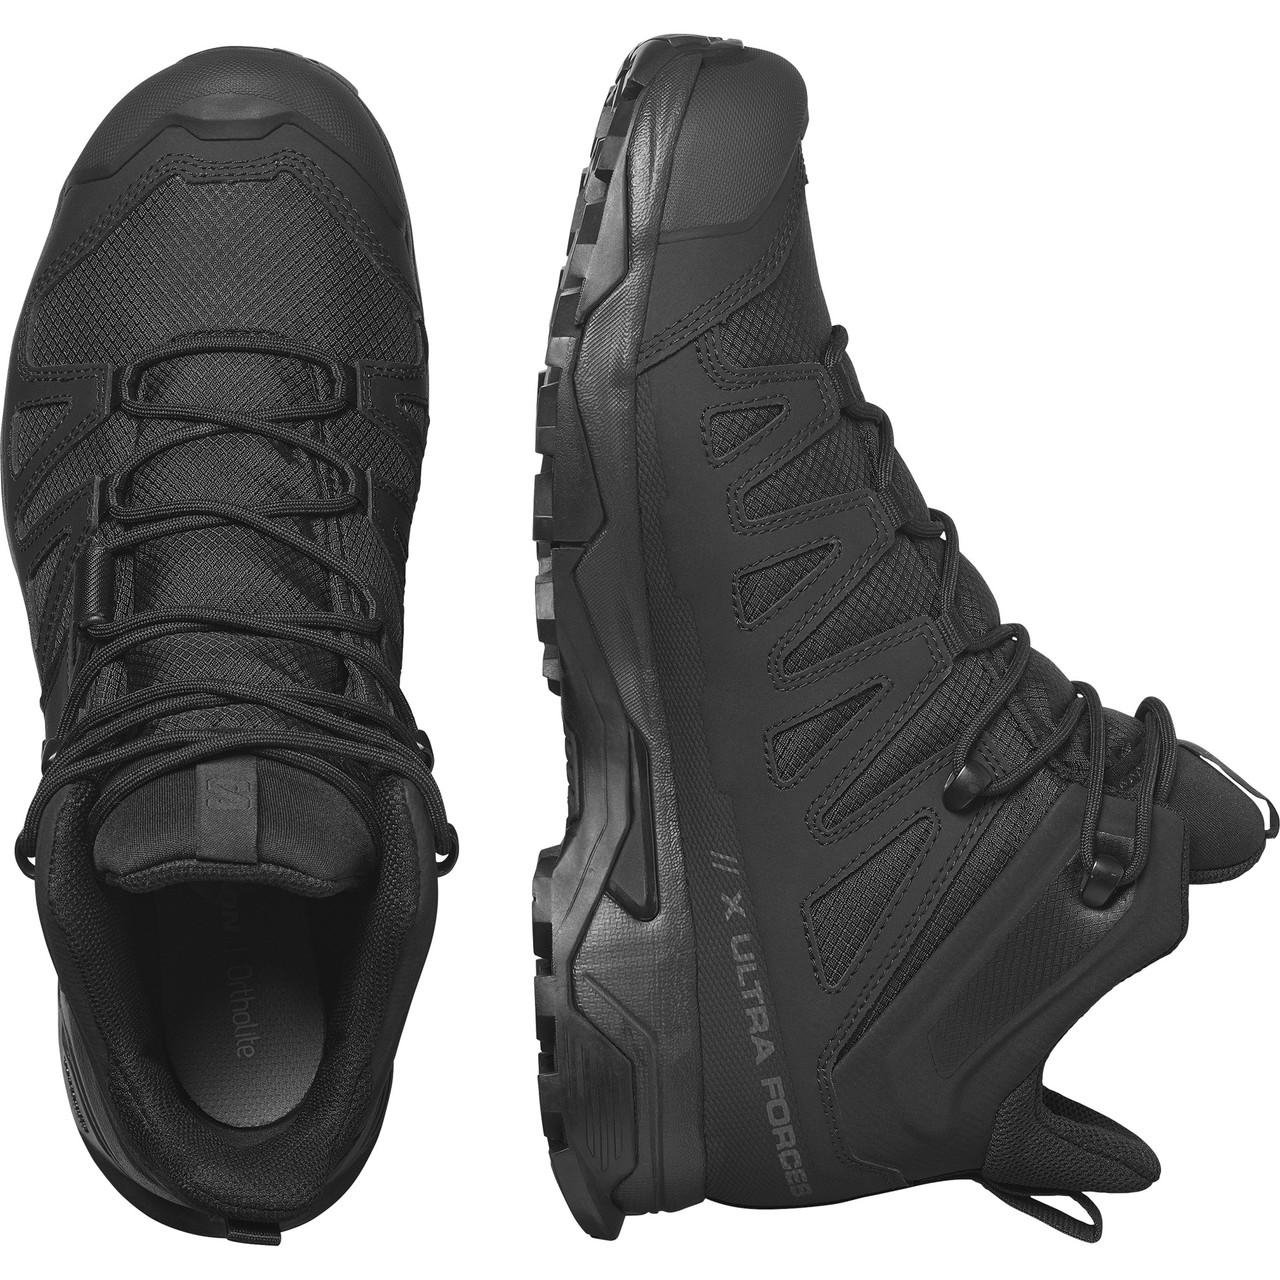 Salomon Black X Ultra Forces Mid Tactical Boot: Comfortable, supportive ...